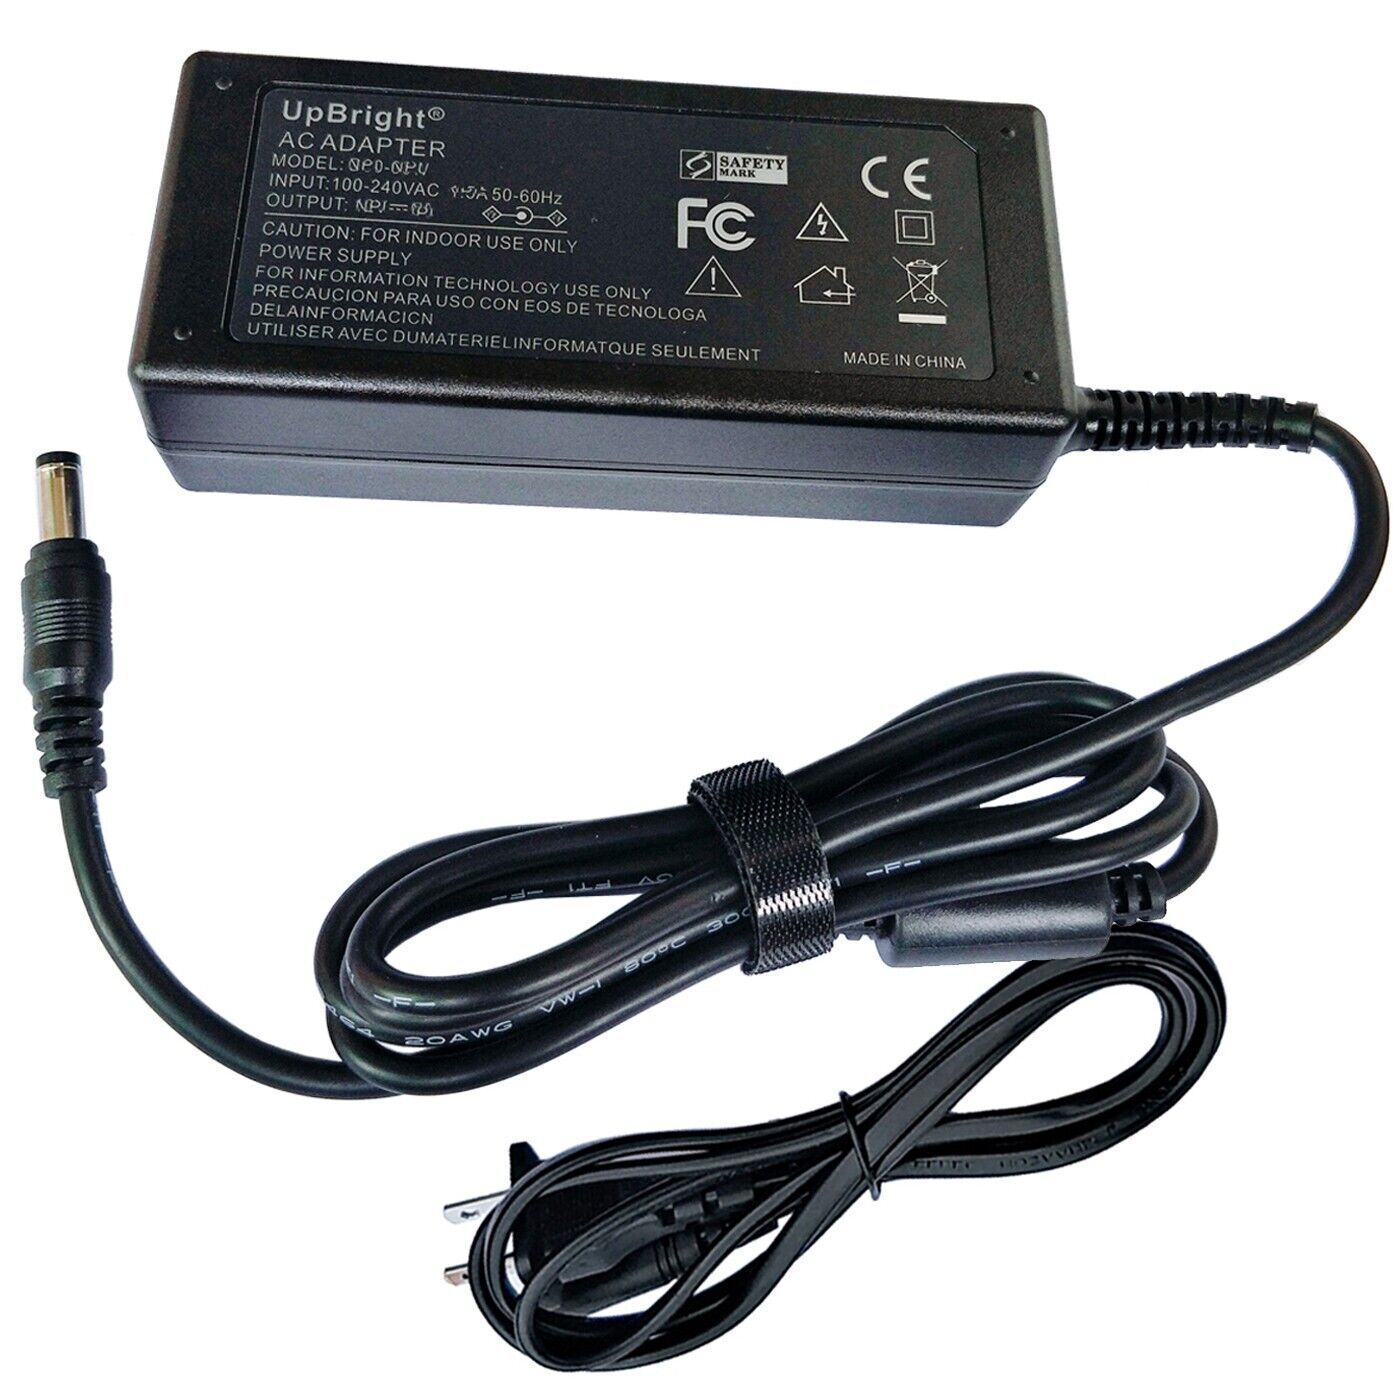 12V AC/DC Adapter For Arcade1Up MSP-A-303611 Class of 81' Deluxe Arcade Machine